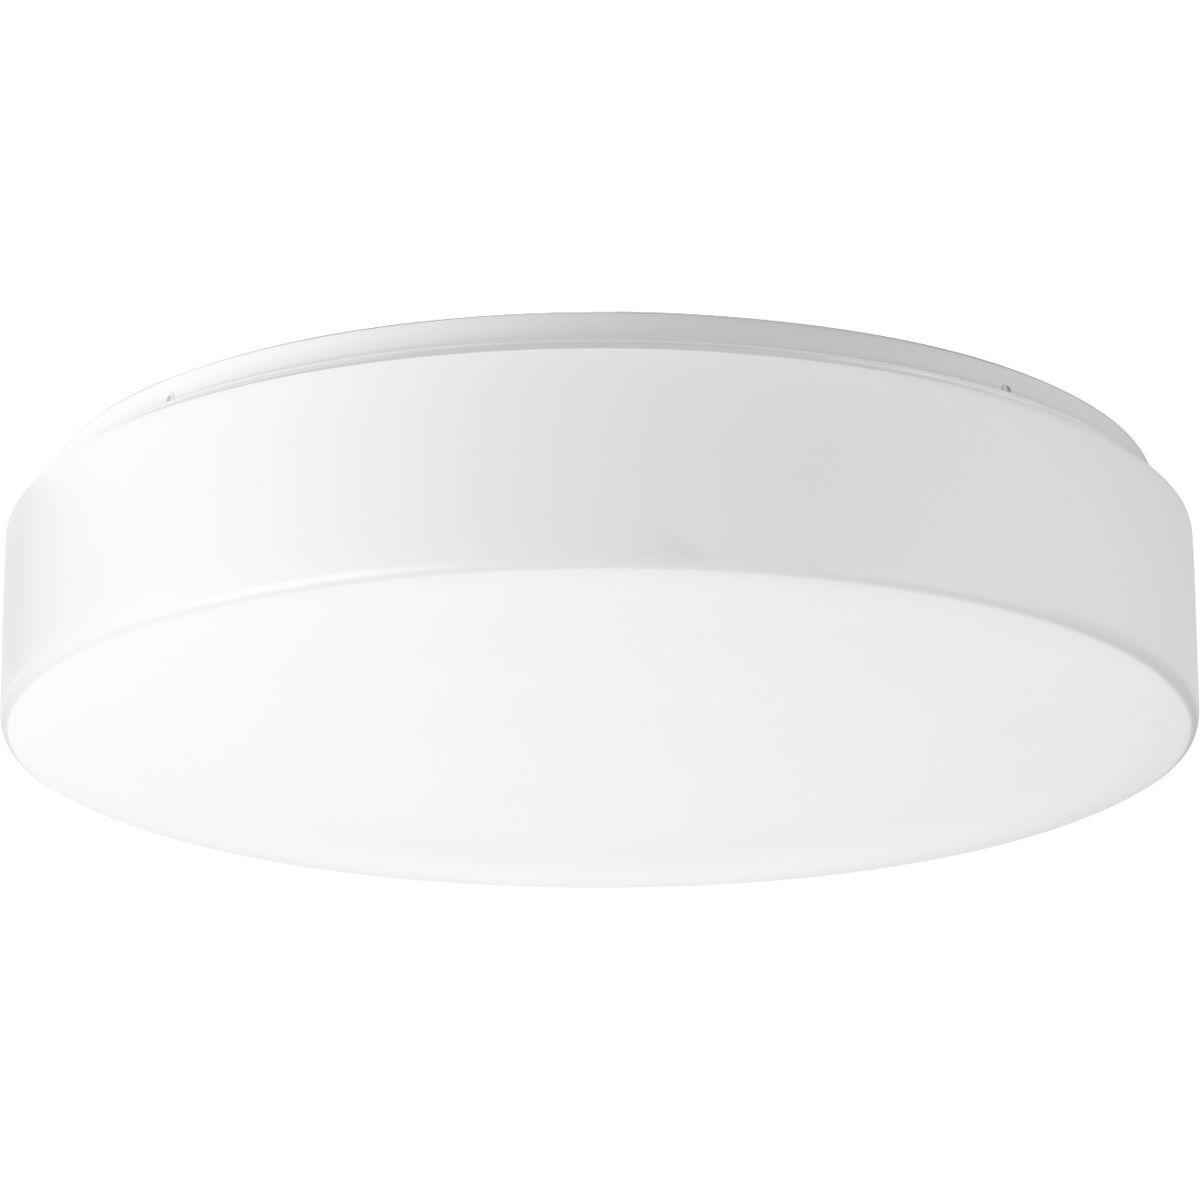 Hubbell P730003-030-30 LED flush mount with white acrylic diffuser mounts to baked enamel ceiling pan. Twist on installation with a single locking thumb screw. UL approved for damp locations. Ceiling or wall mount. 3000 lumens, 93.8 lumens/watt (delivered), 3000K and 90CRI. ENE